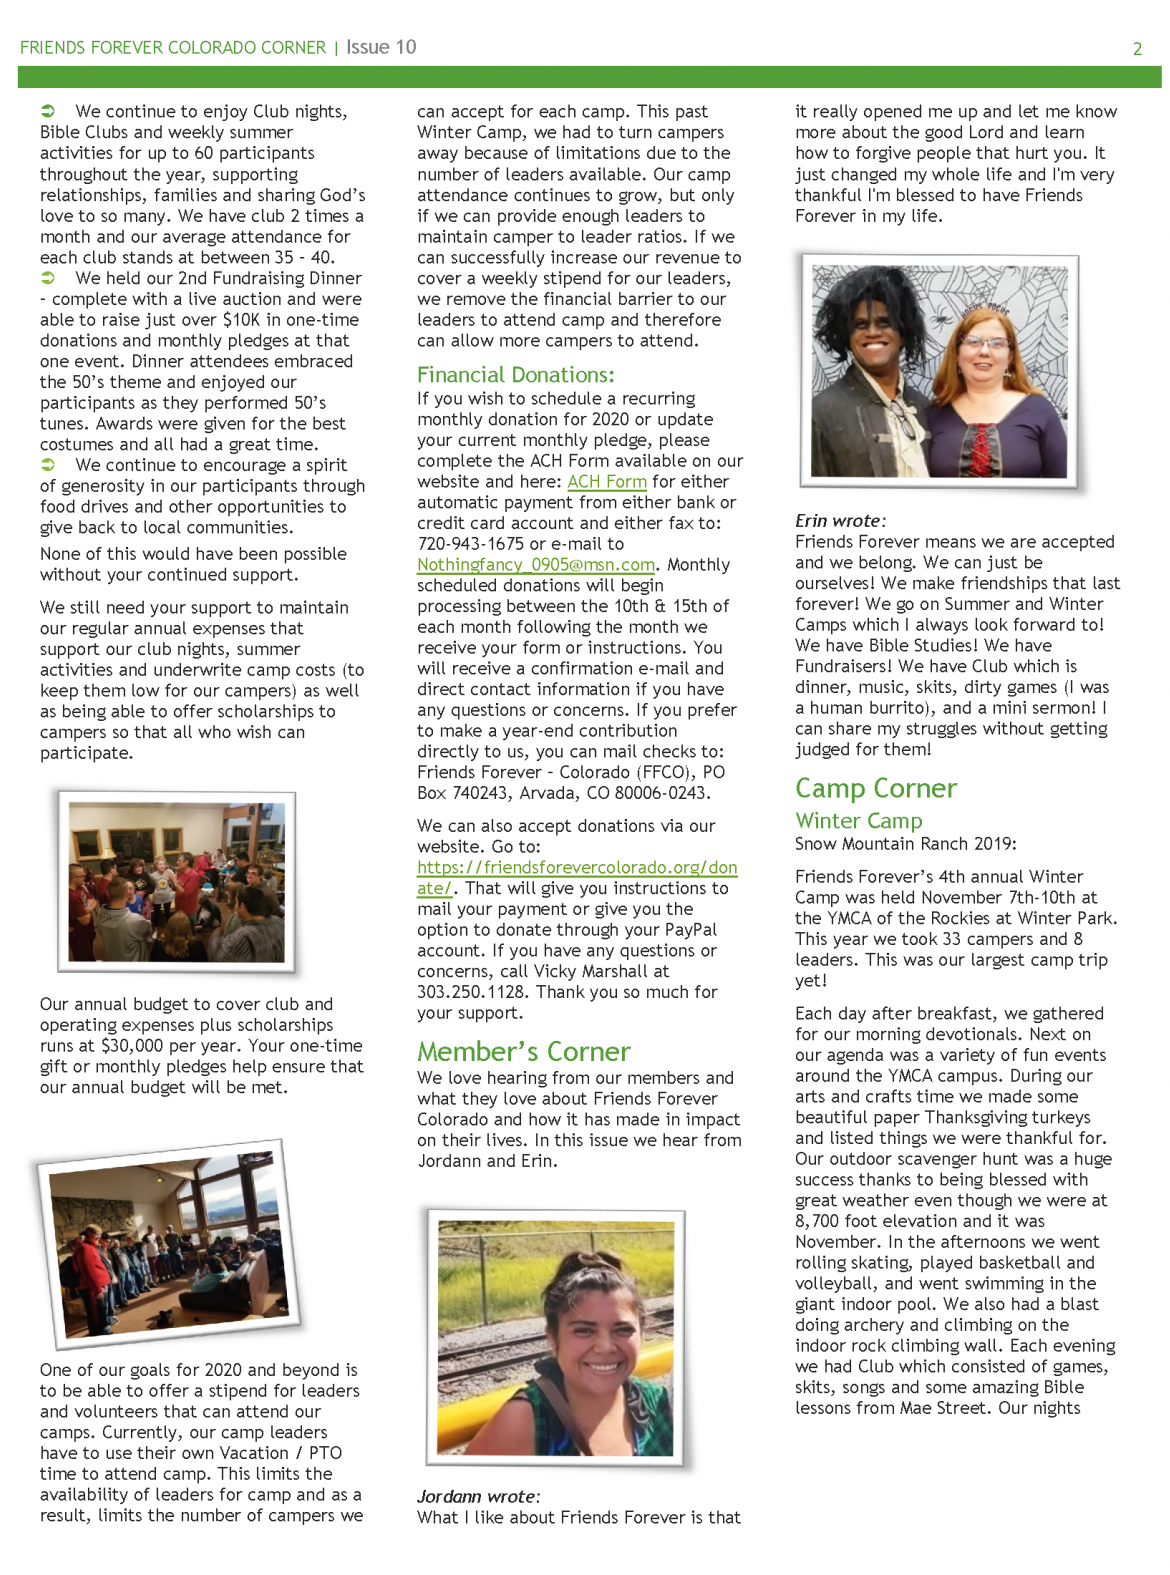 winter newsletter 2019 page 2